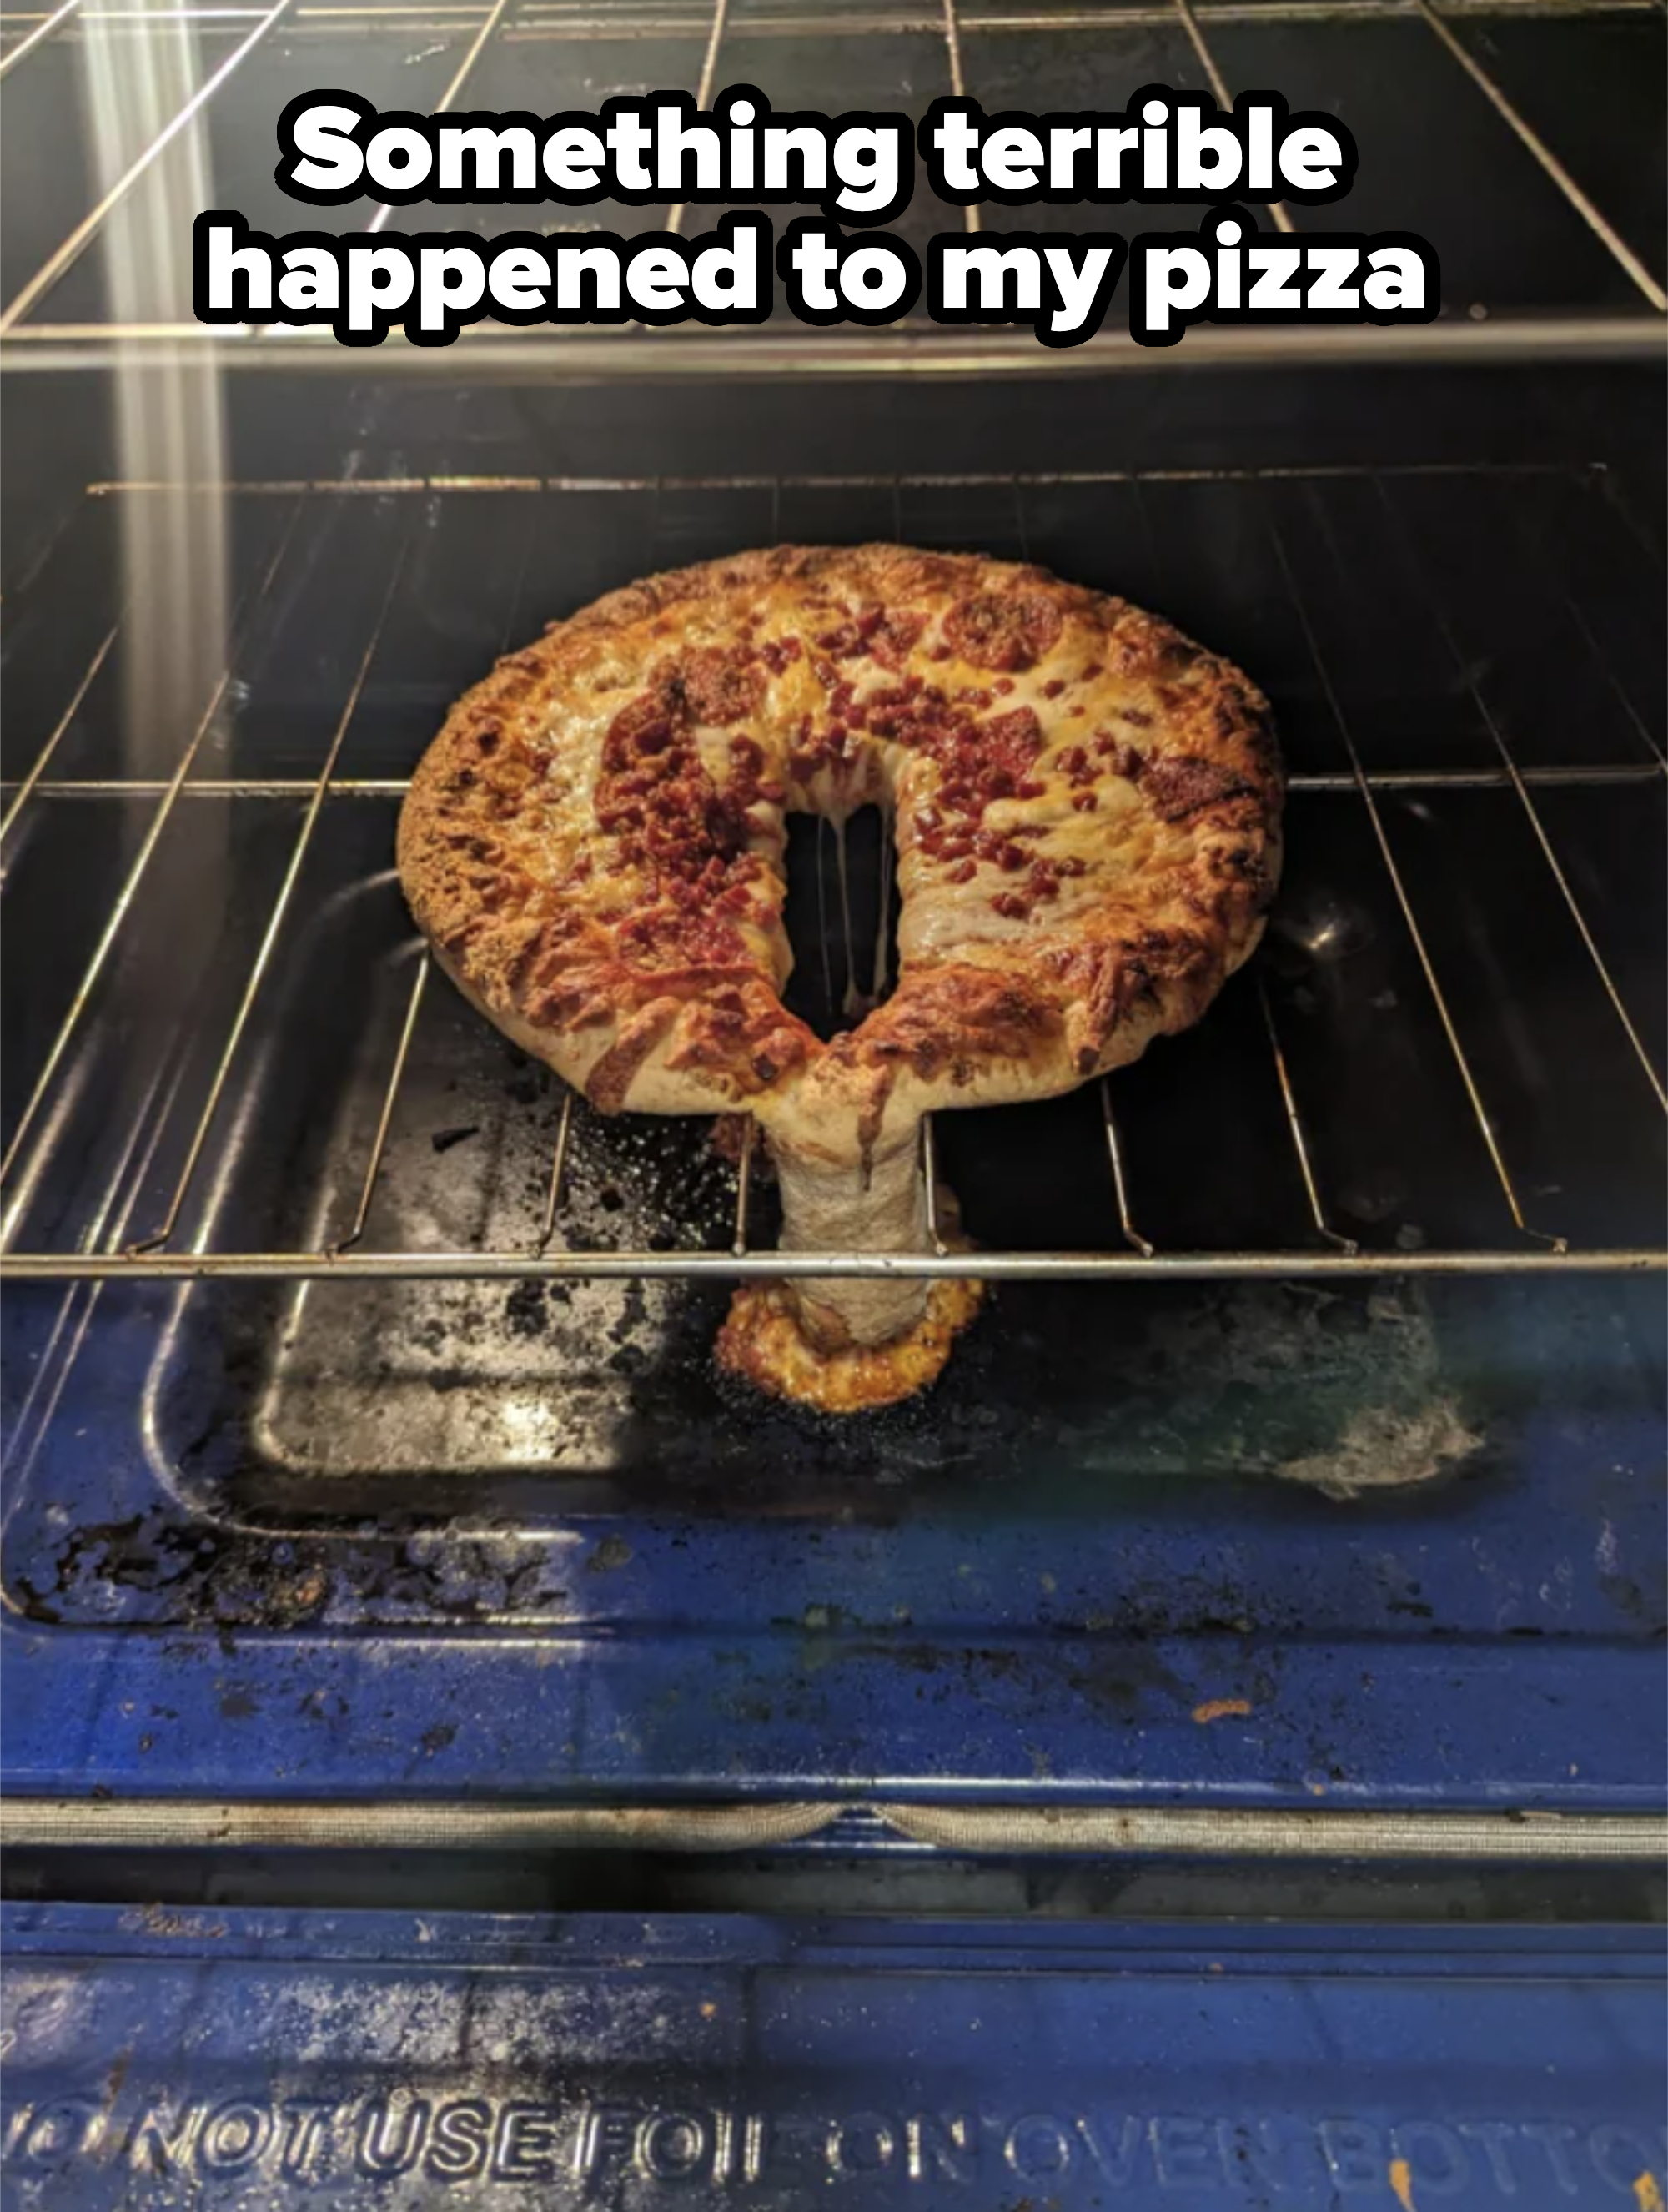 A pizza in the oven collapsed through the rack, creating a mess below it